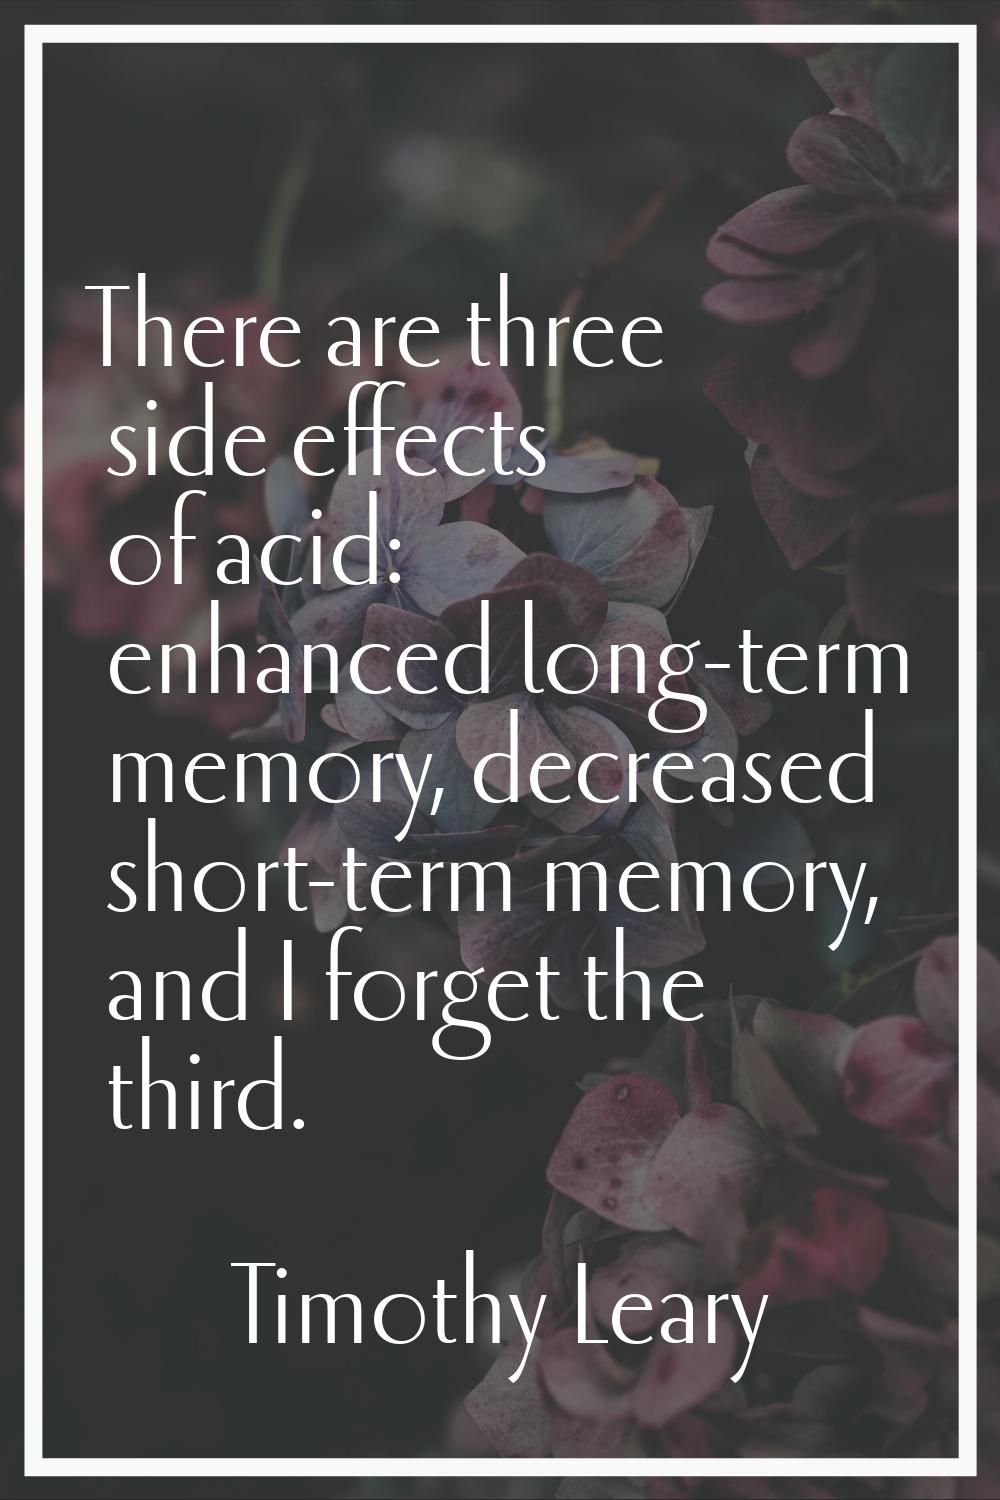 There are three side effects of acid: enhanced long-term memory, decreased short-term memory, and I